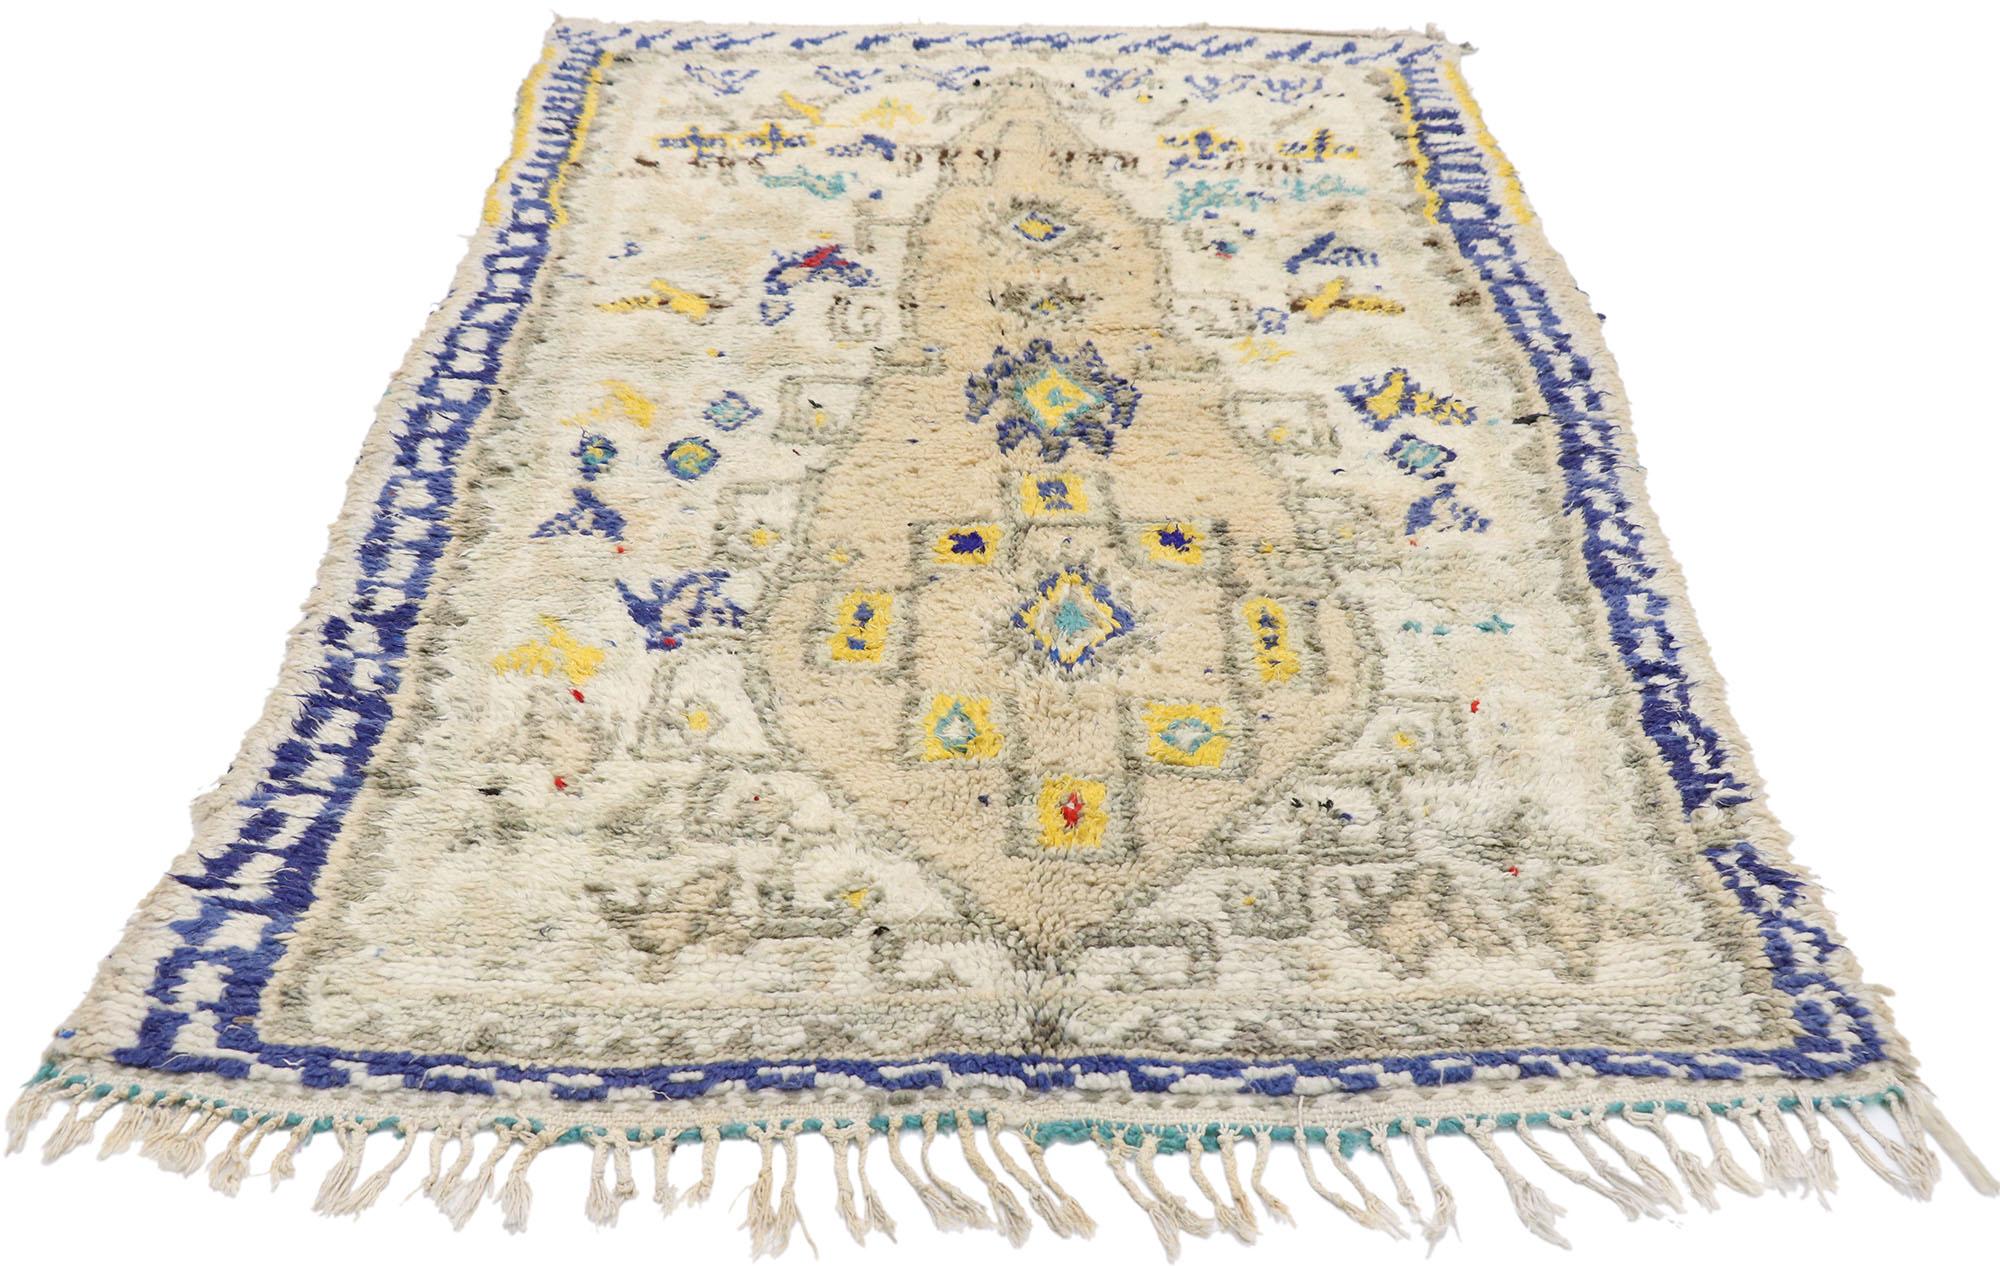 Bohemian Vintage Berber Moroccan Azilal Rug with Boho Chic Hygge Style and Memphis Design For Sale